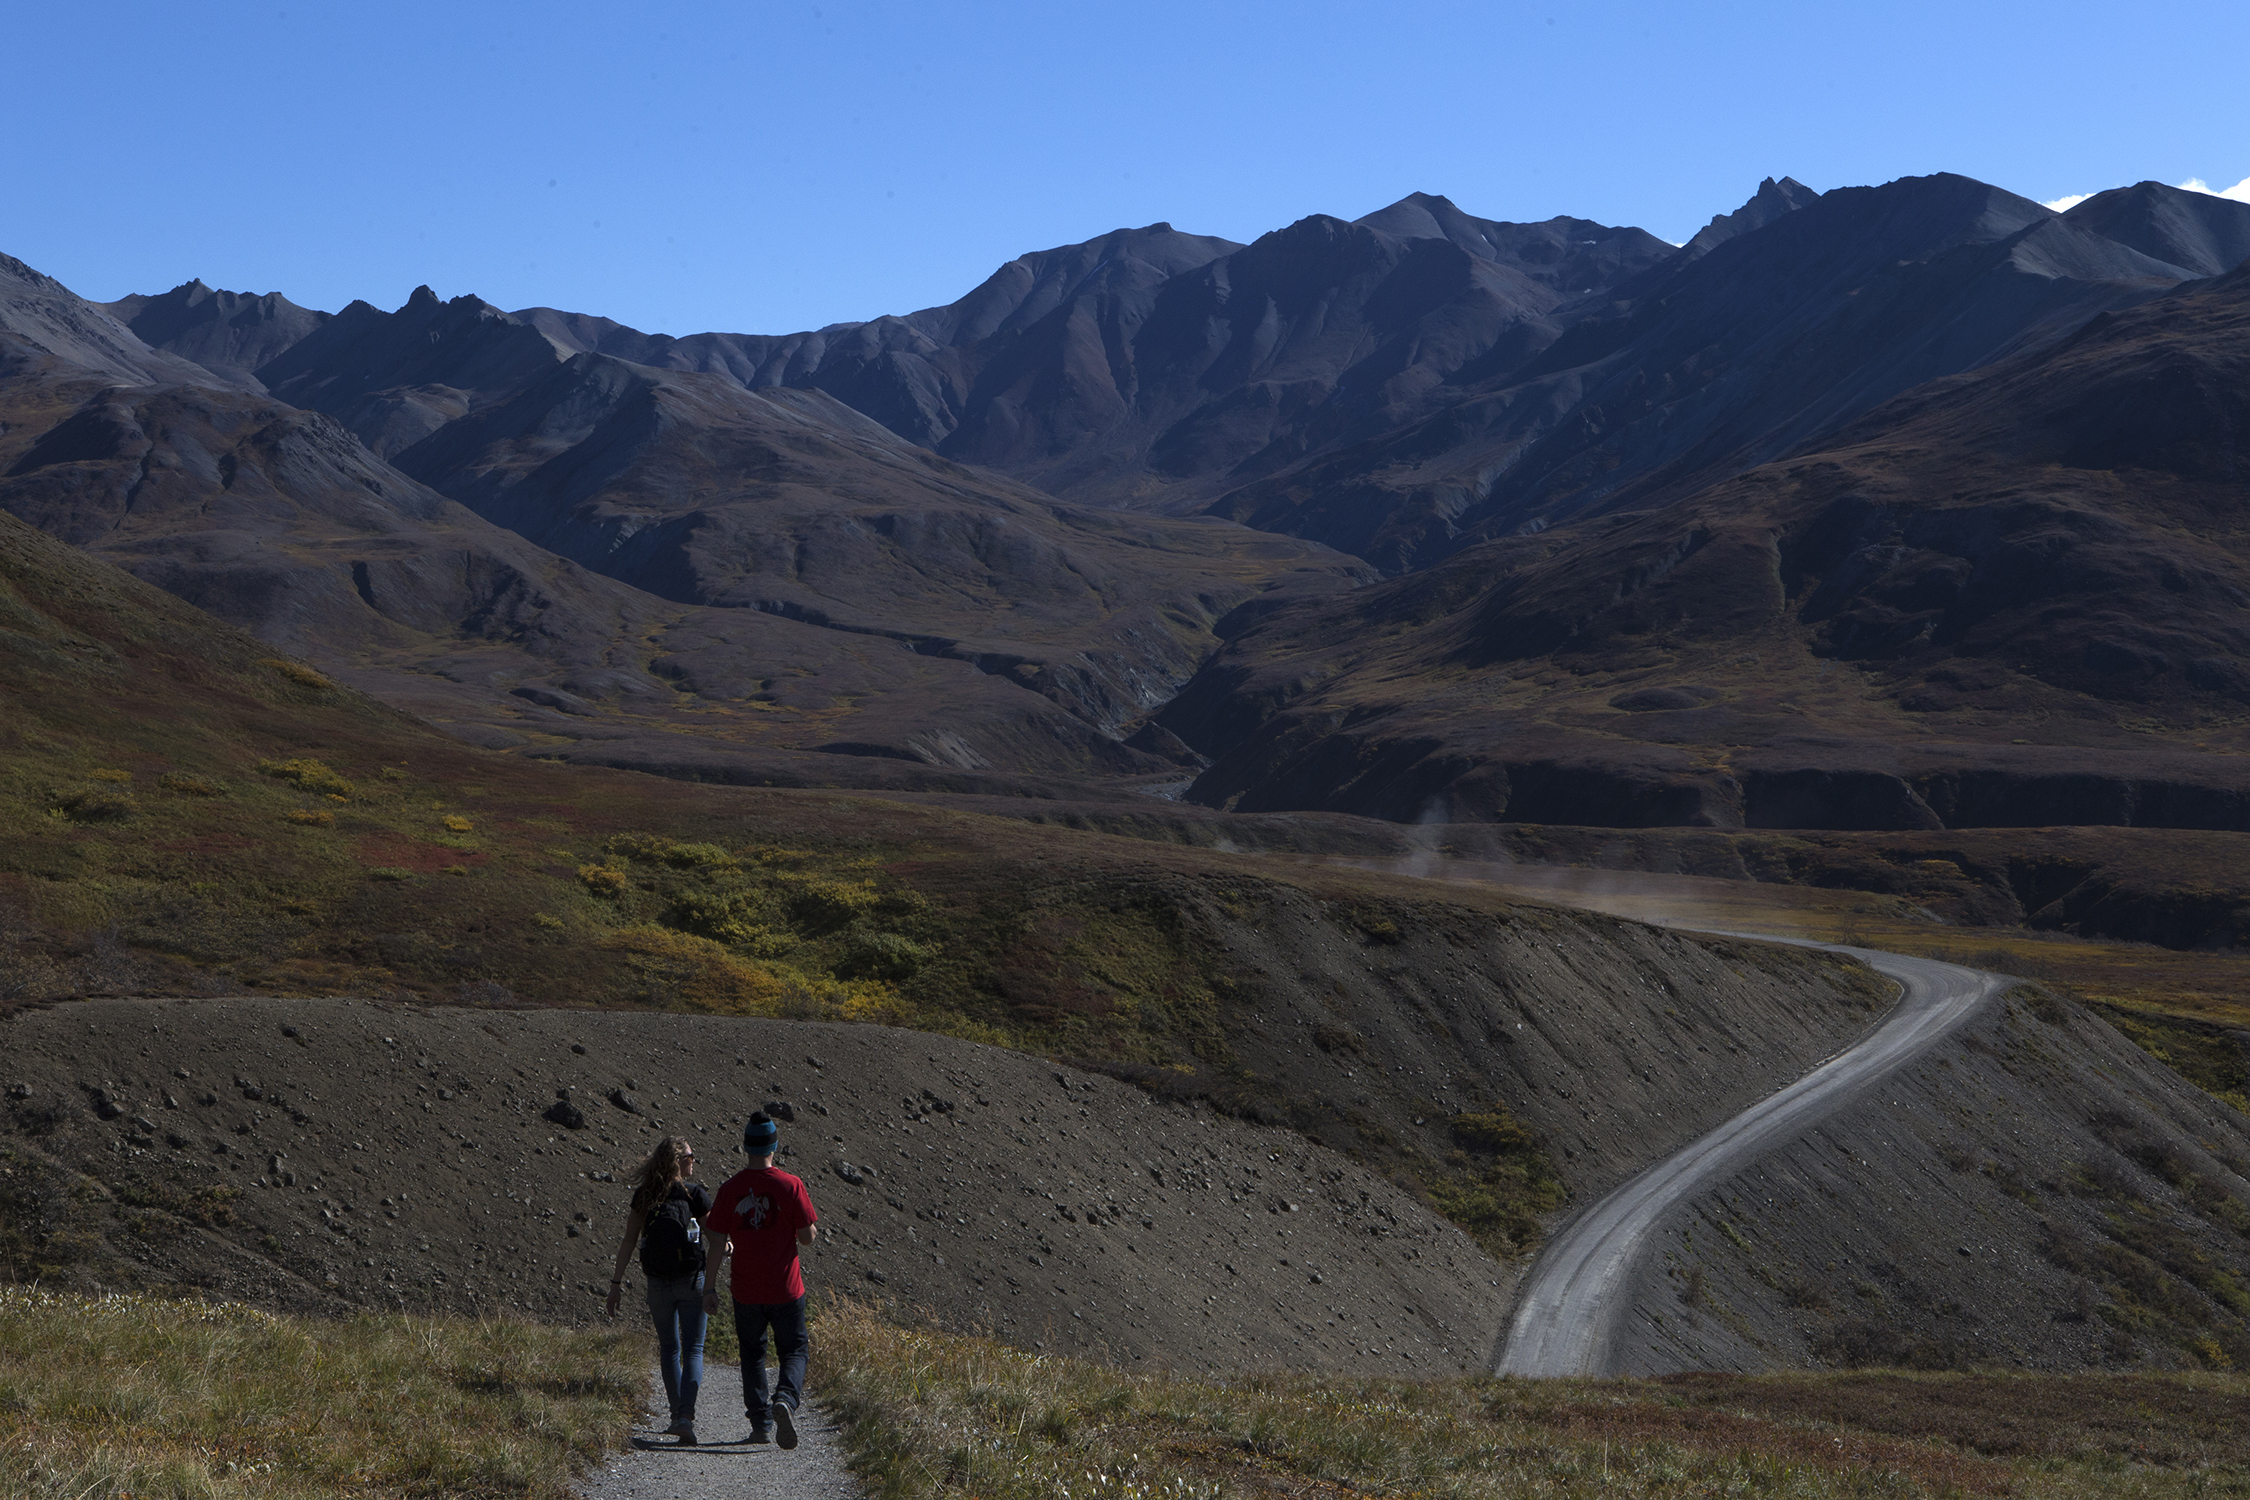  The only road through Denali National Park and Preserve is 92 miles long, parallels the Alaskan Range and travels through low valleys and high mountain passes. Private cars can only travel 15 miles into the park to Savage River, beyond that point on